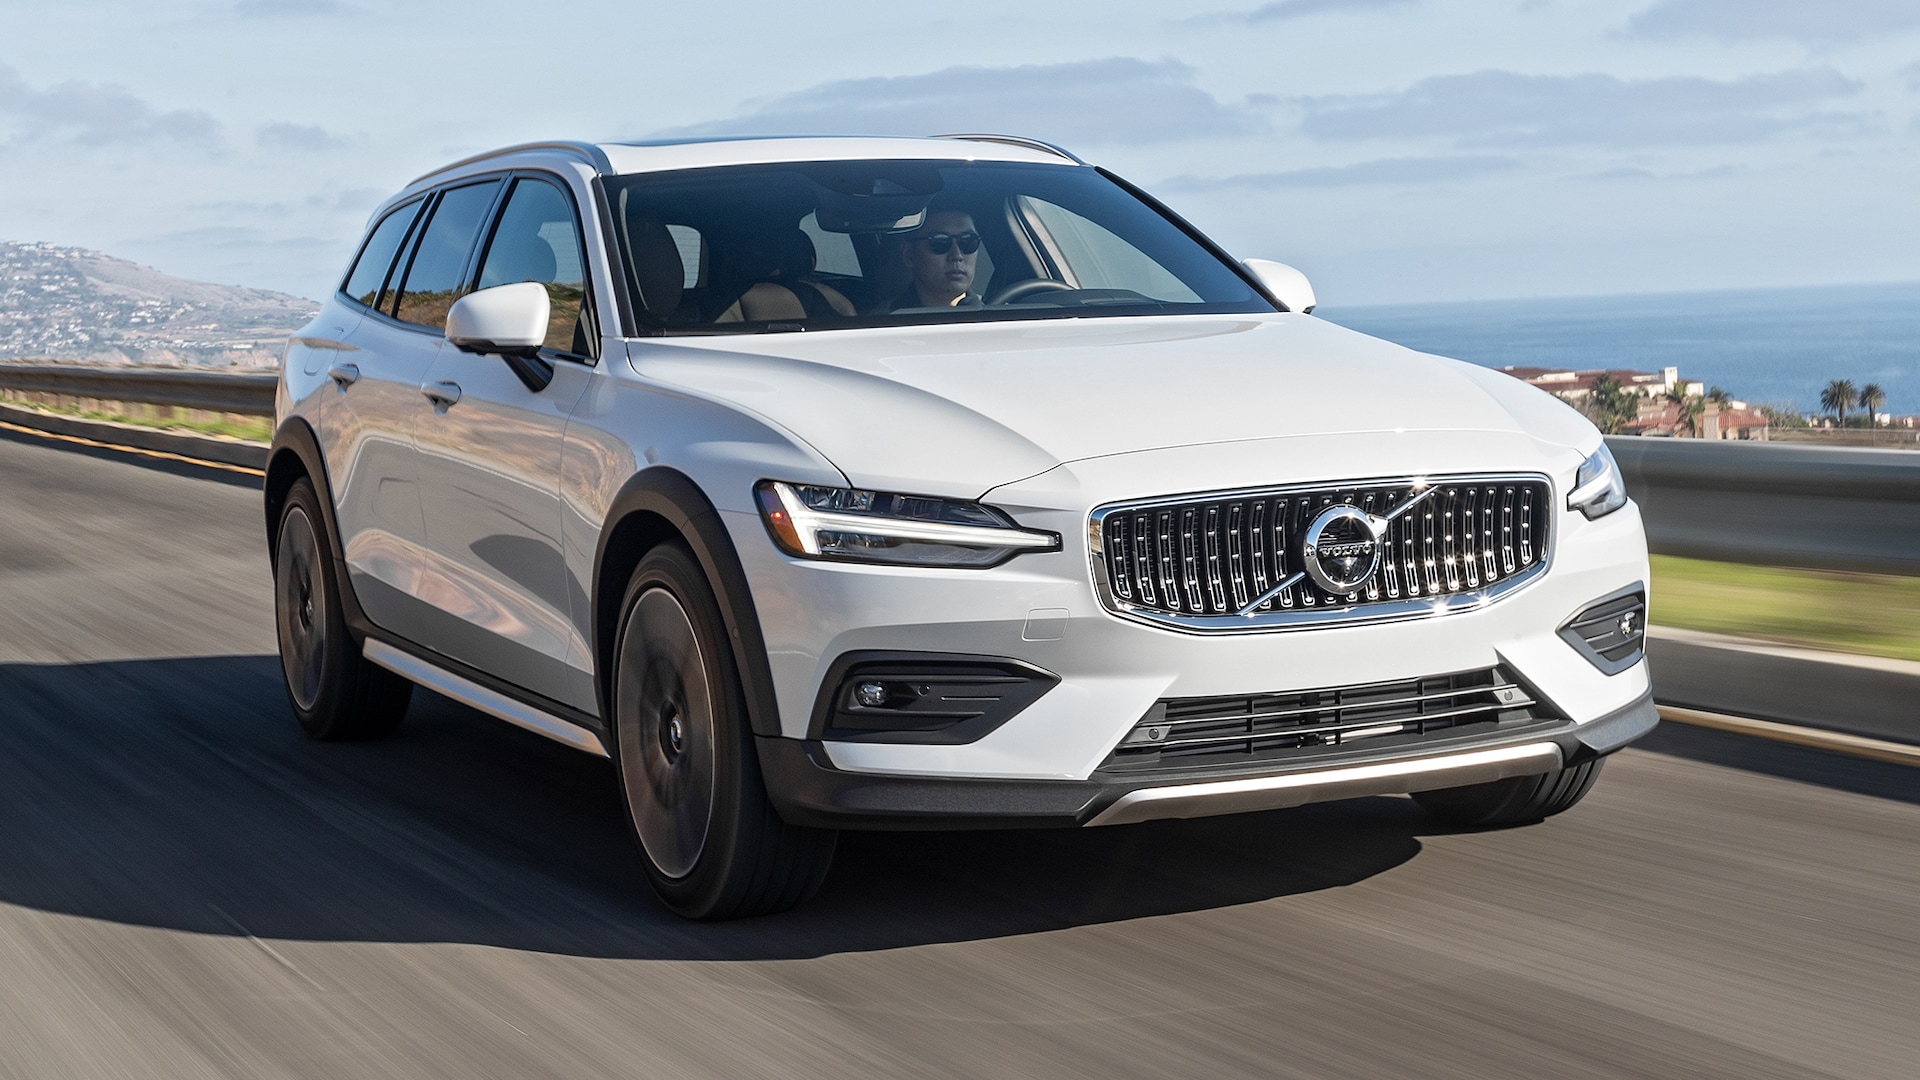 2021 Volvo V60 Cross Country Review: Better Than the Audi and Subaru?